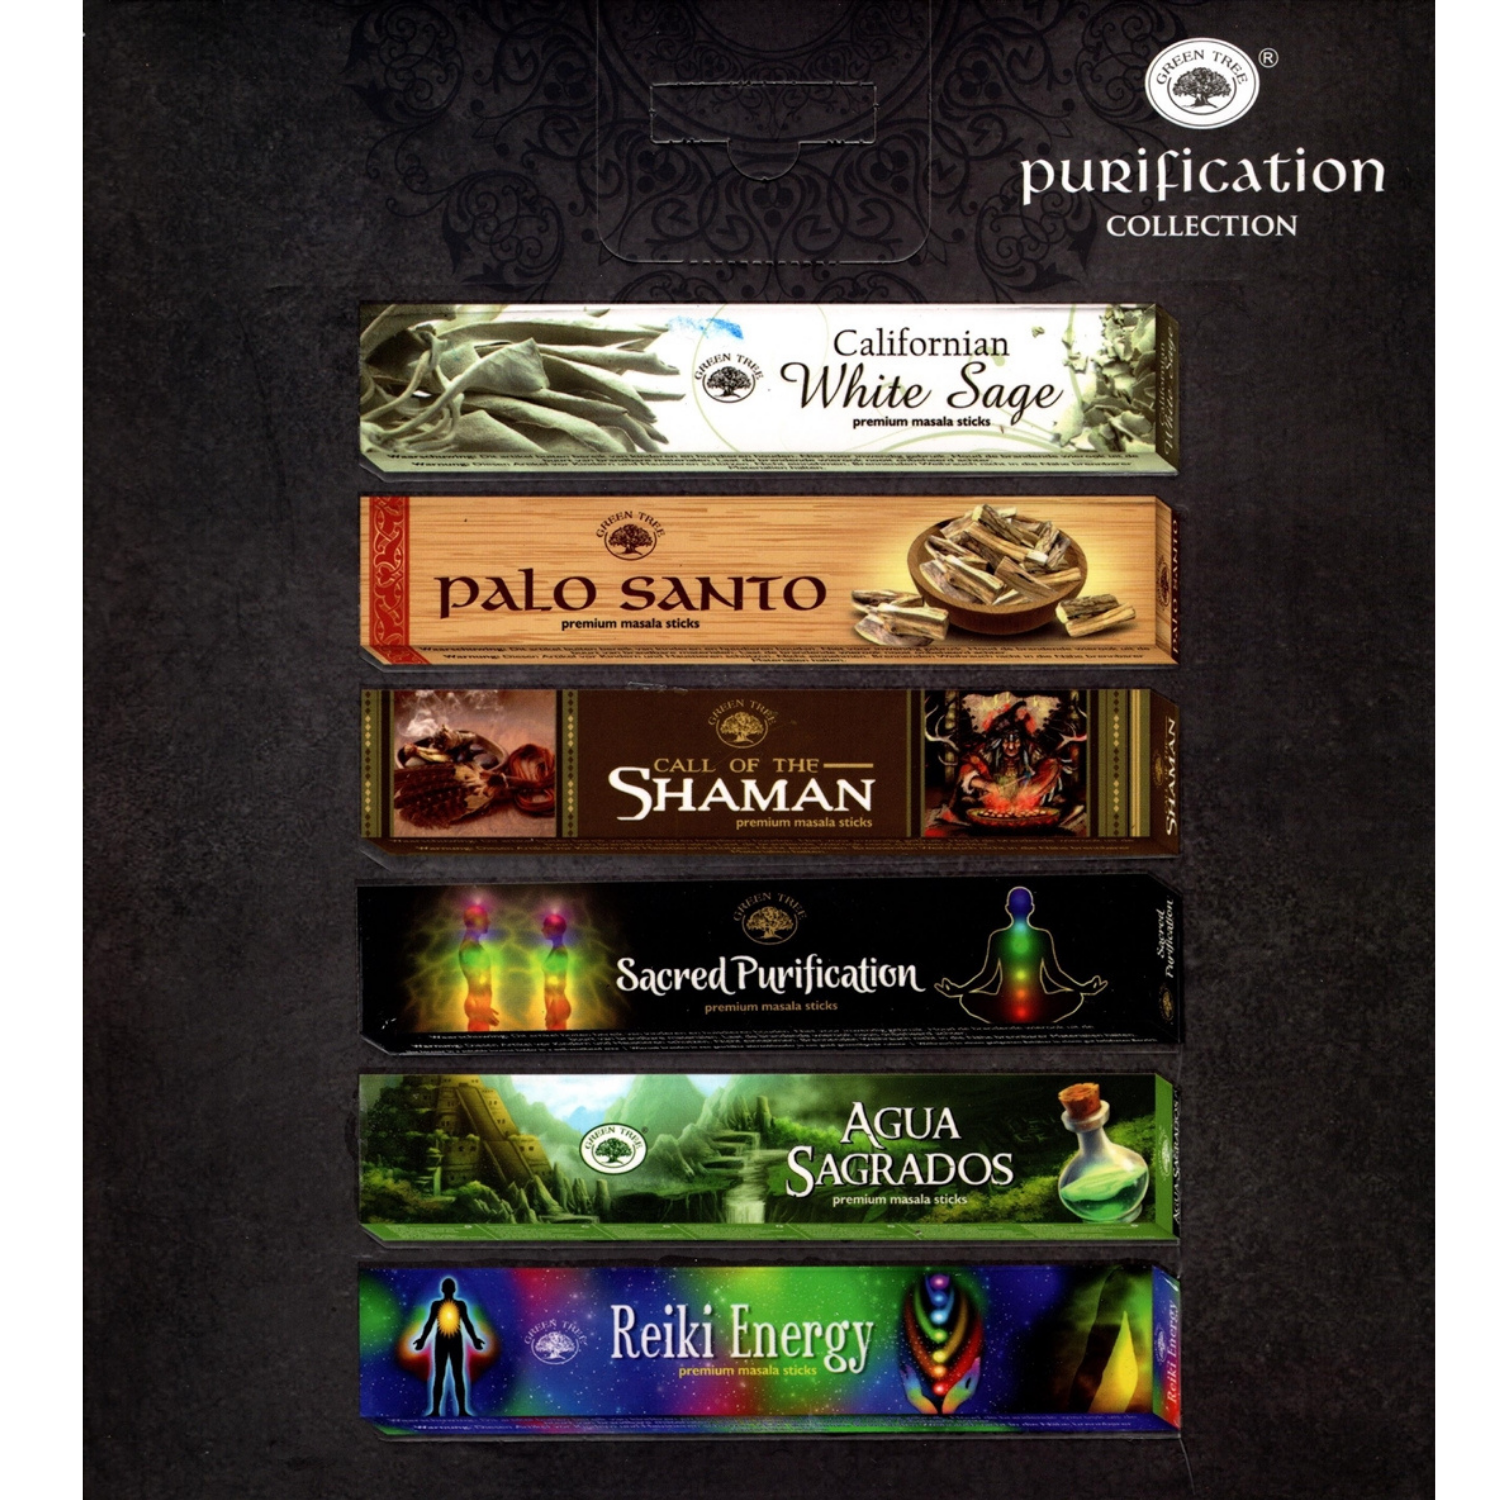 Purification Collection - 6 Fragrance (15 g x 6 Packets)